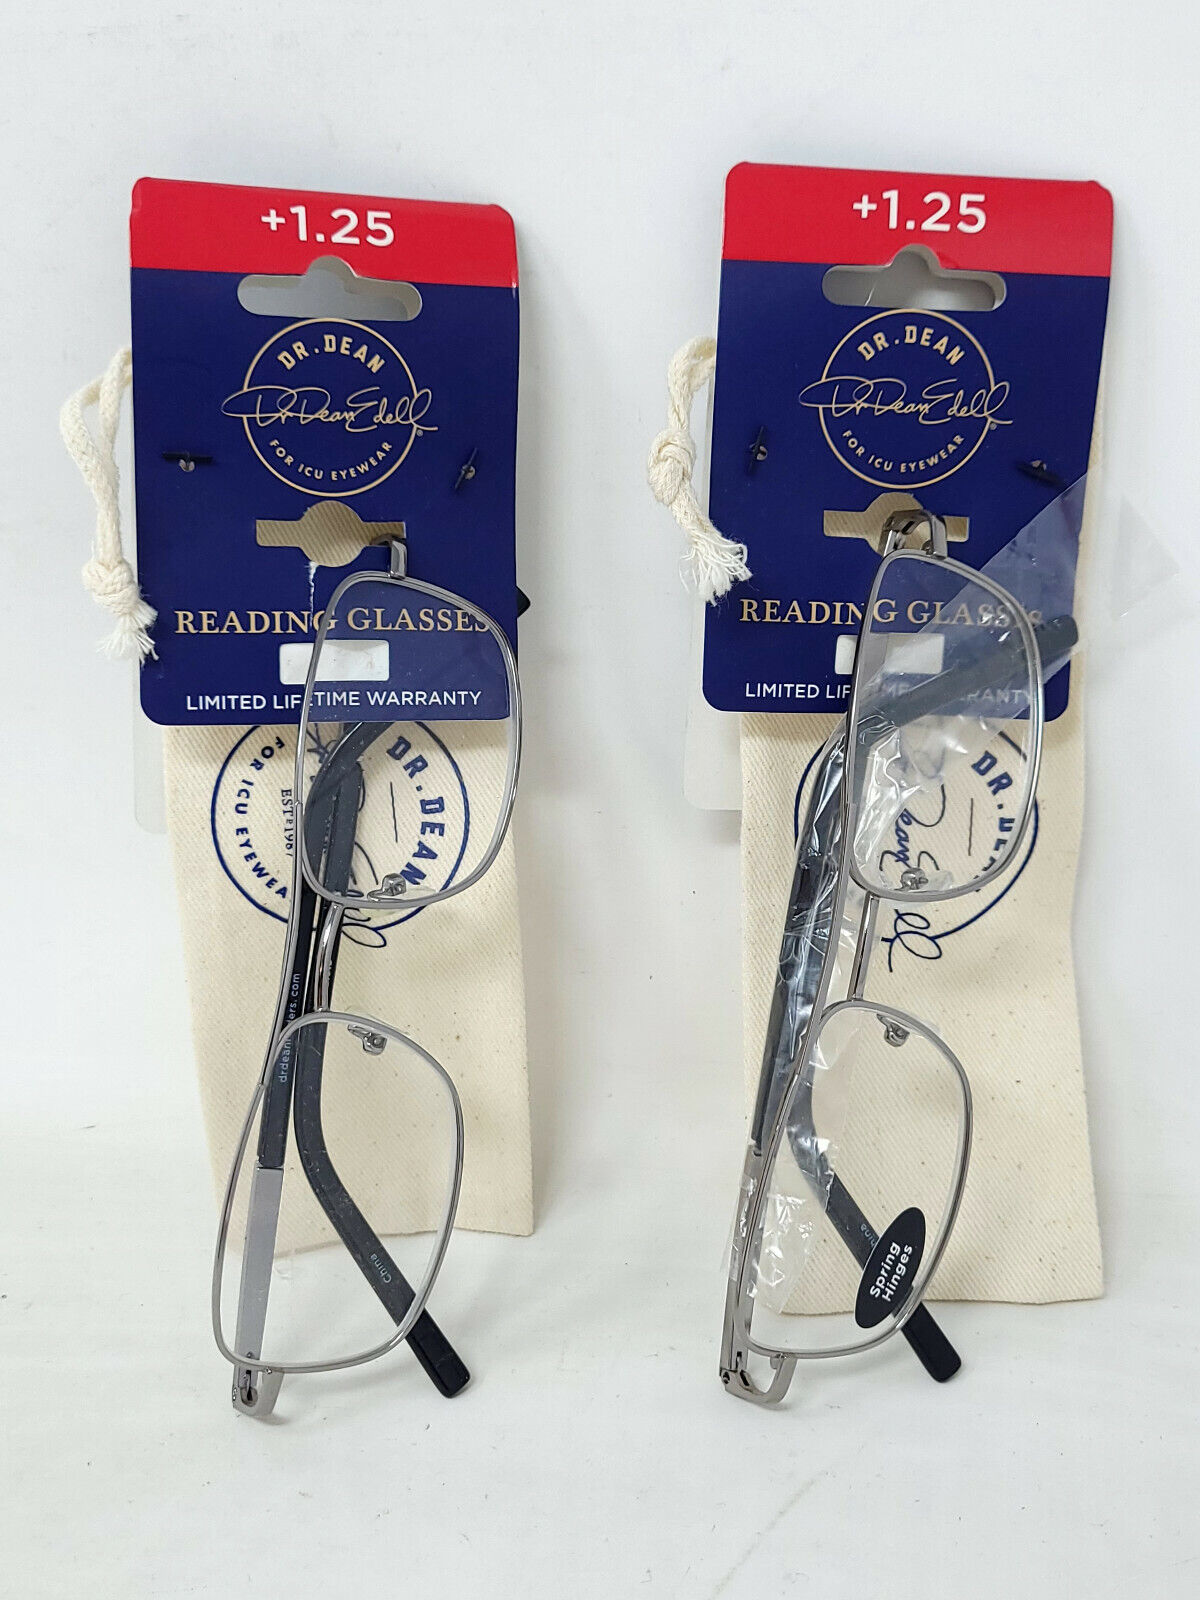 2x Dr. Dean  Reading Glasses - Double Bridge Frame with sleeve  - +1.25 - NEW